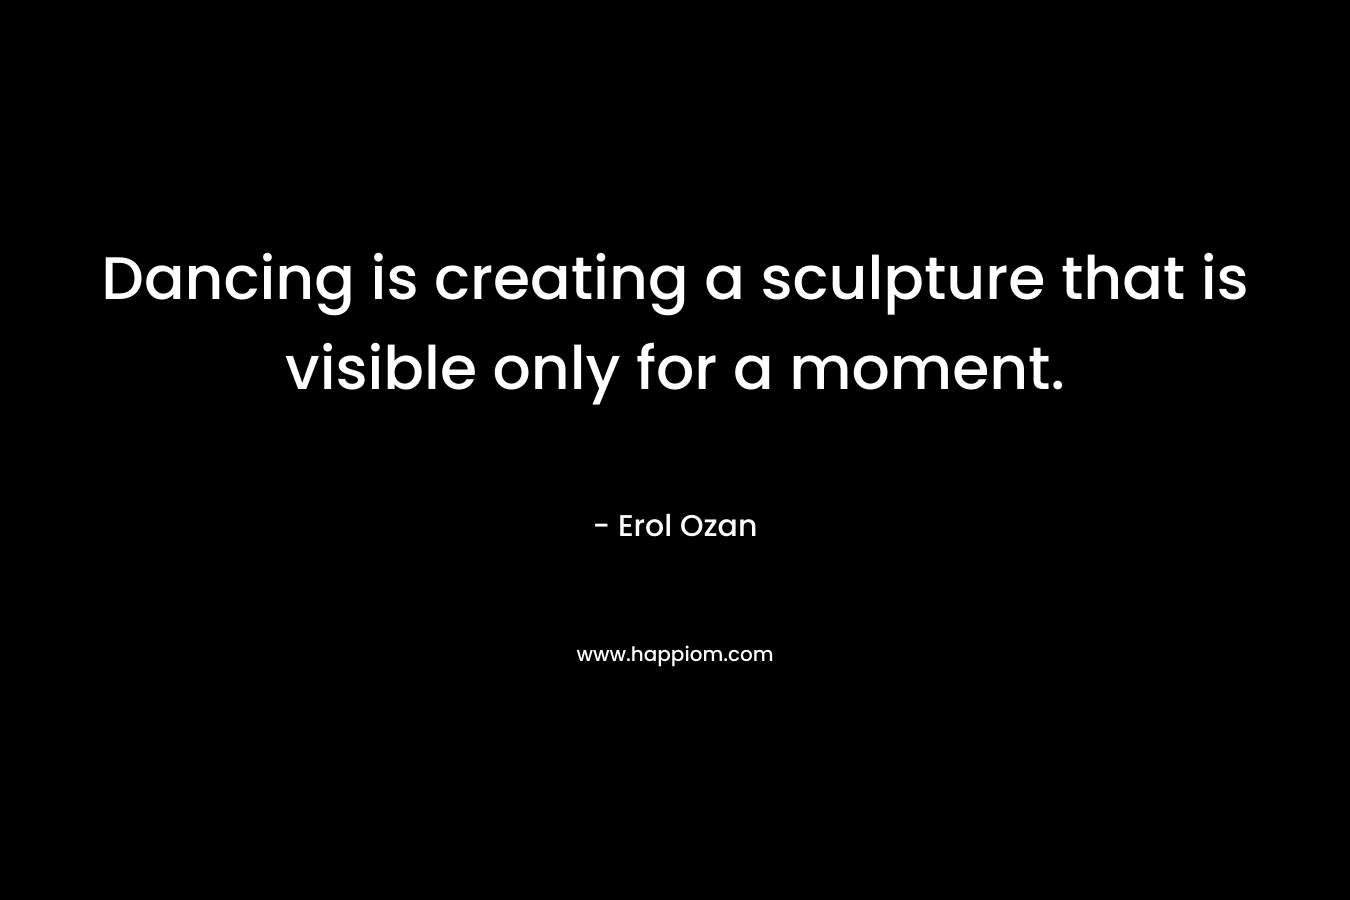 Dancing is creating a sculpture that is visible only for a moment. – Erol Ozan